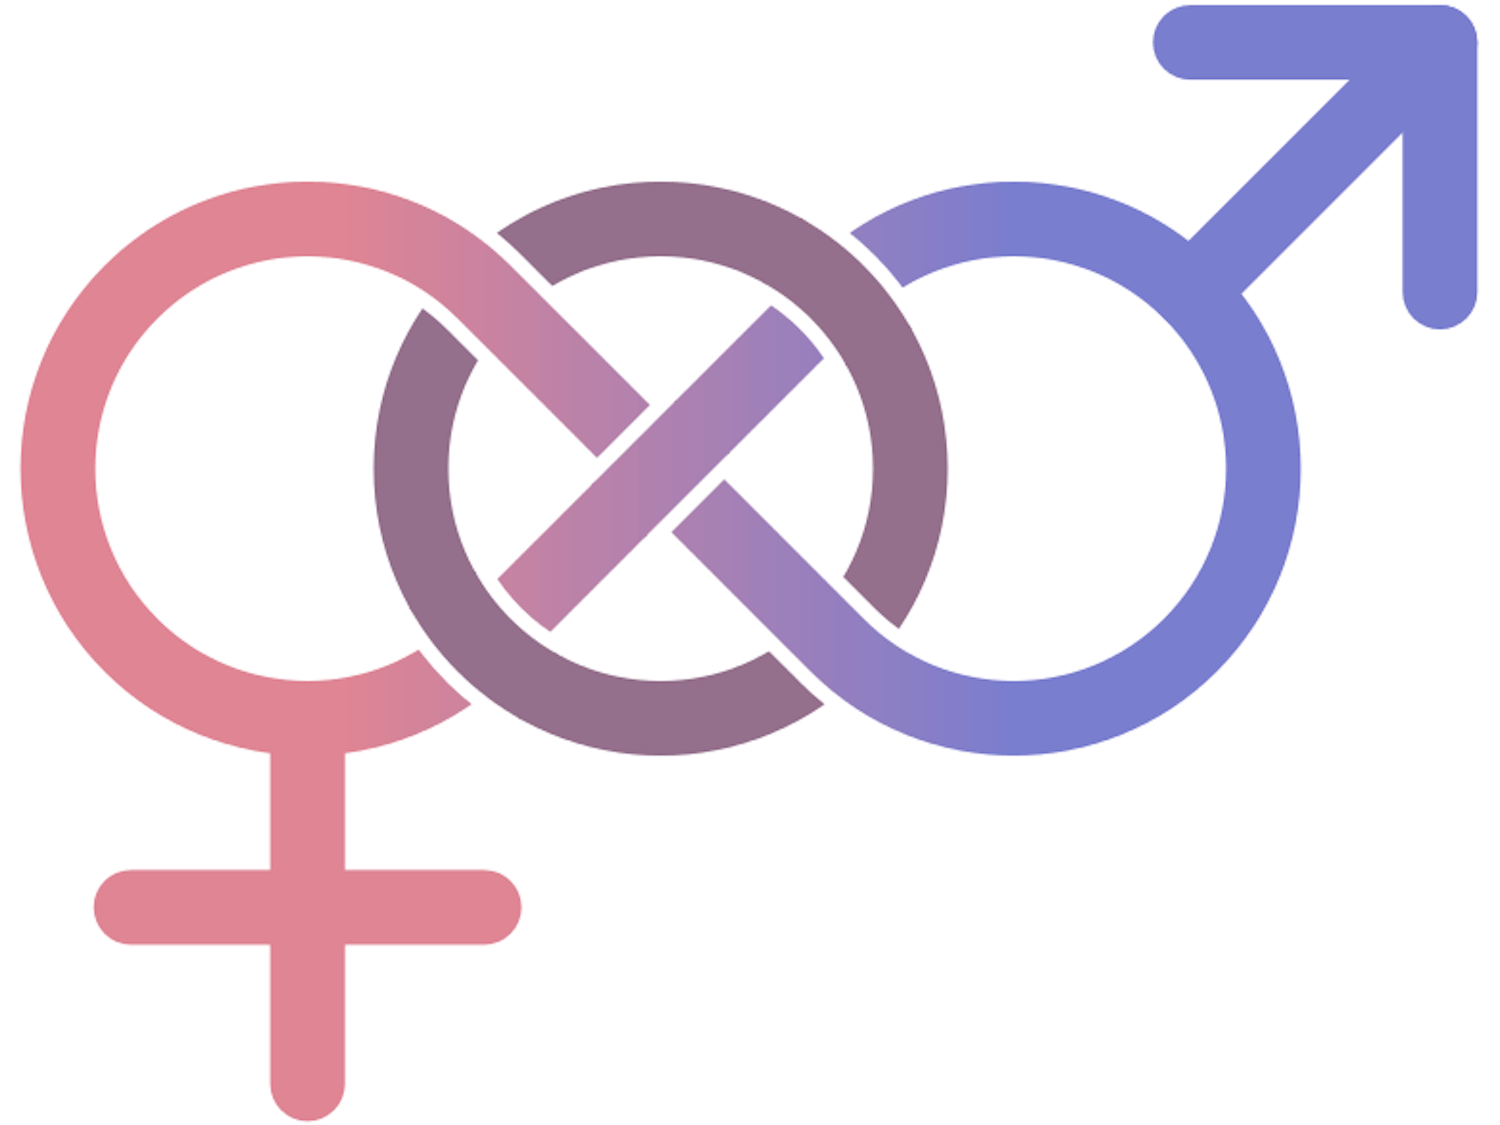 781px-Whitehead-link-alternative-sexuality-symbol.svg_.png